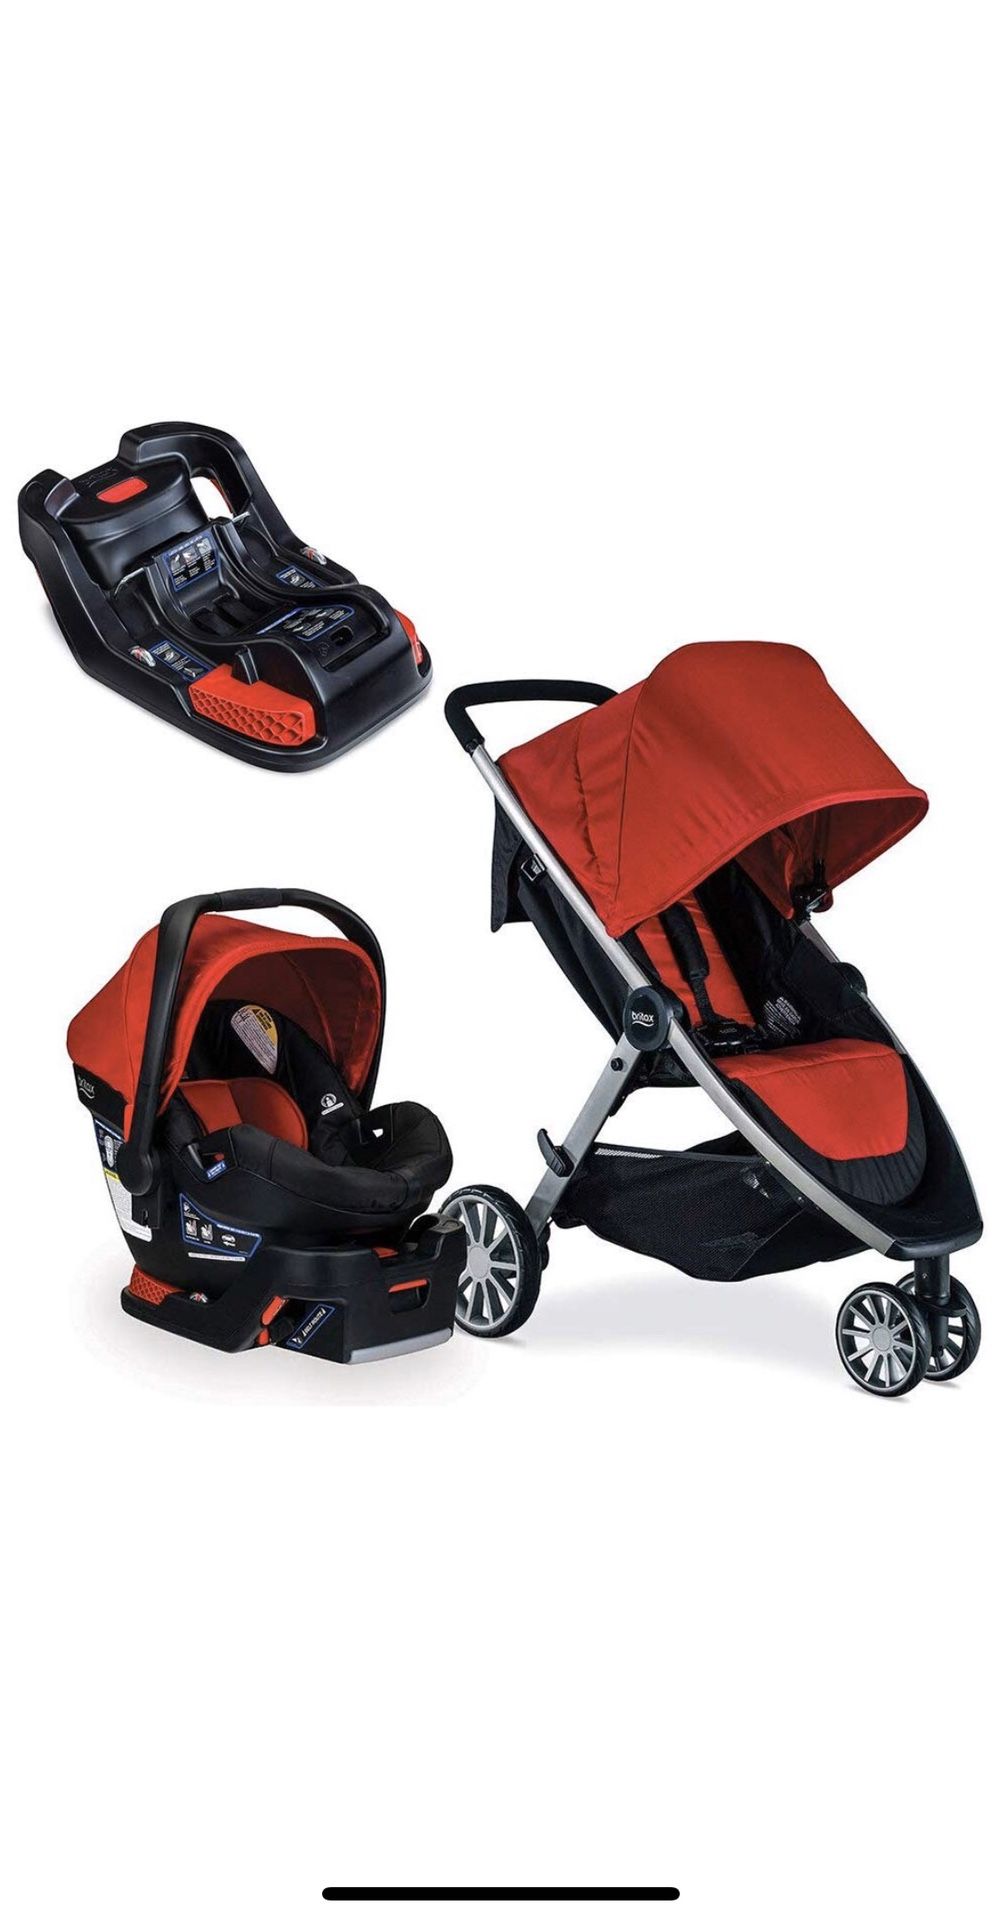 Britax B-Agile Travel System with B-Safe 35 Infant Car Seat - Birth to 55 Pounds, Red